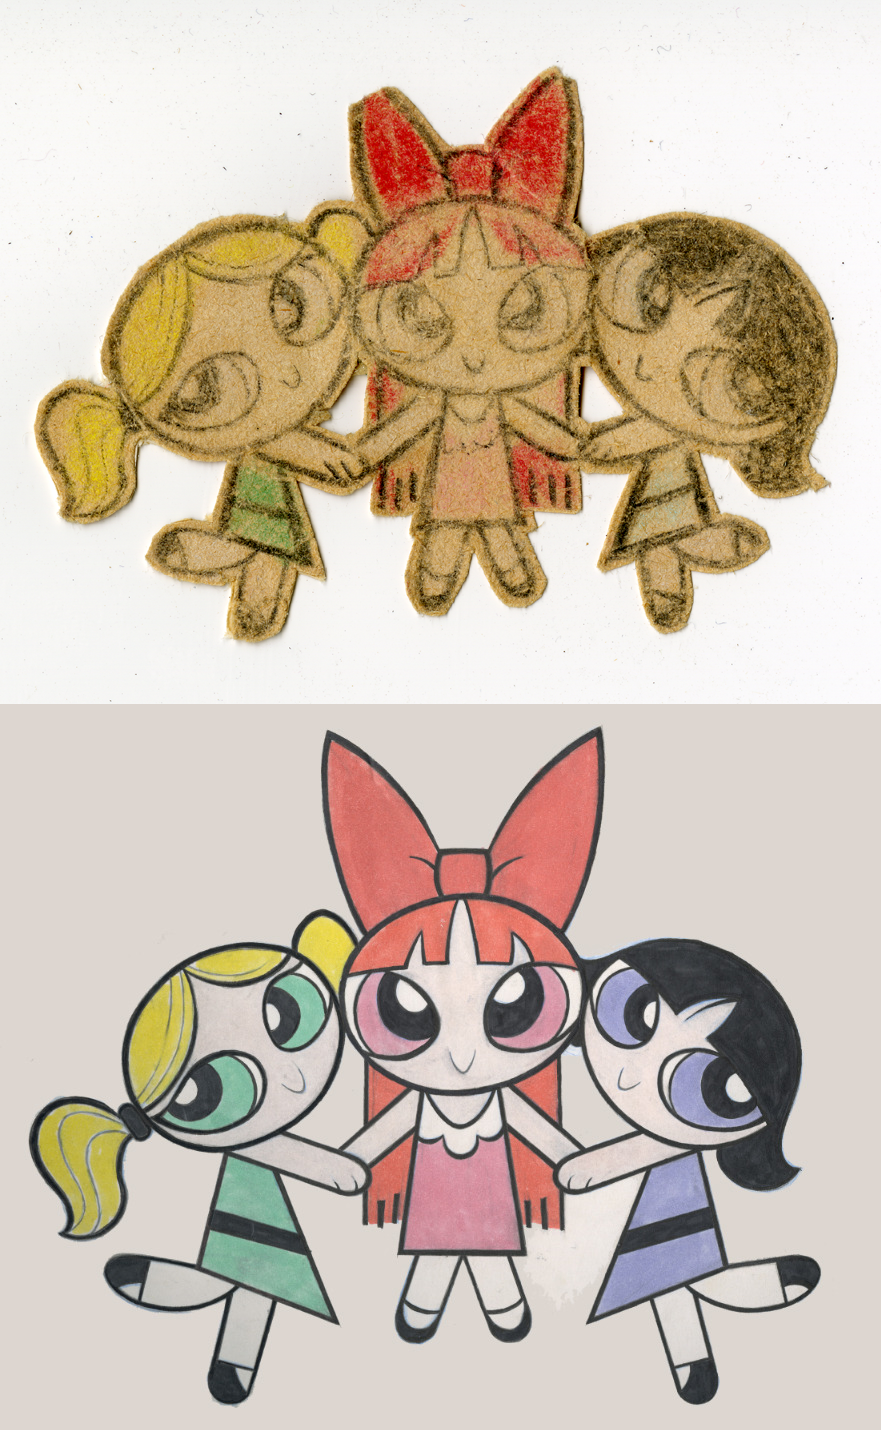 Blossom Powerpuff Girls Coloring Page for Kids - Free The Powerpuff Girls  Printable Coloring Pages Online for Kids - ColoringPages101.com | Coloring  Pages for Kids